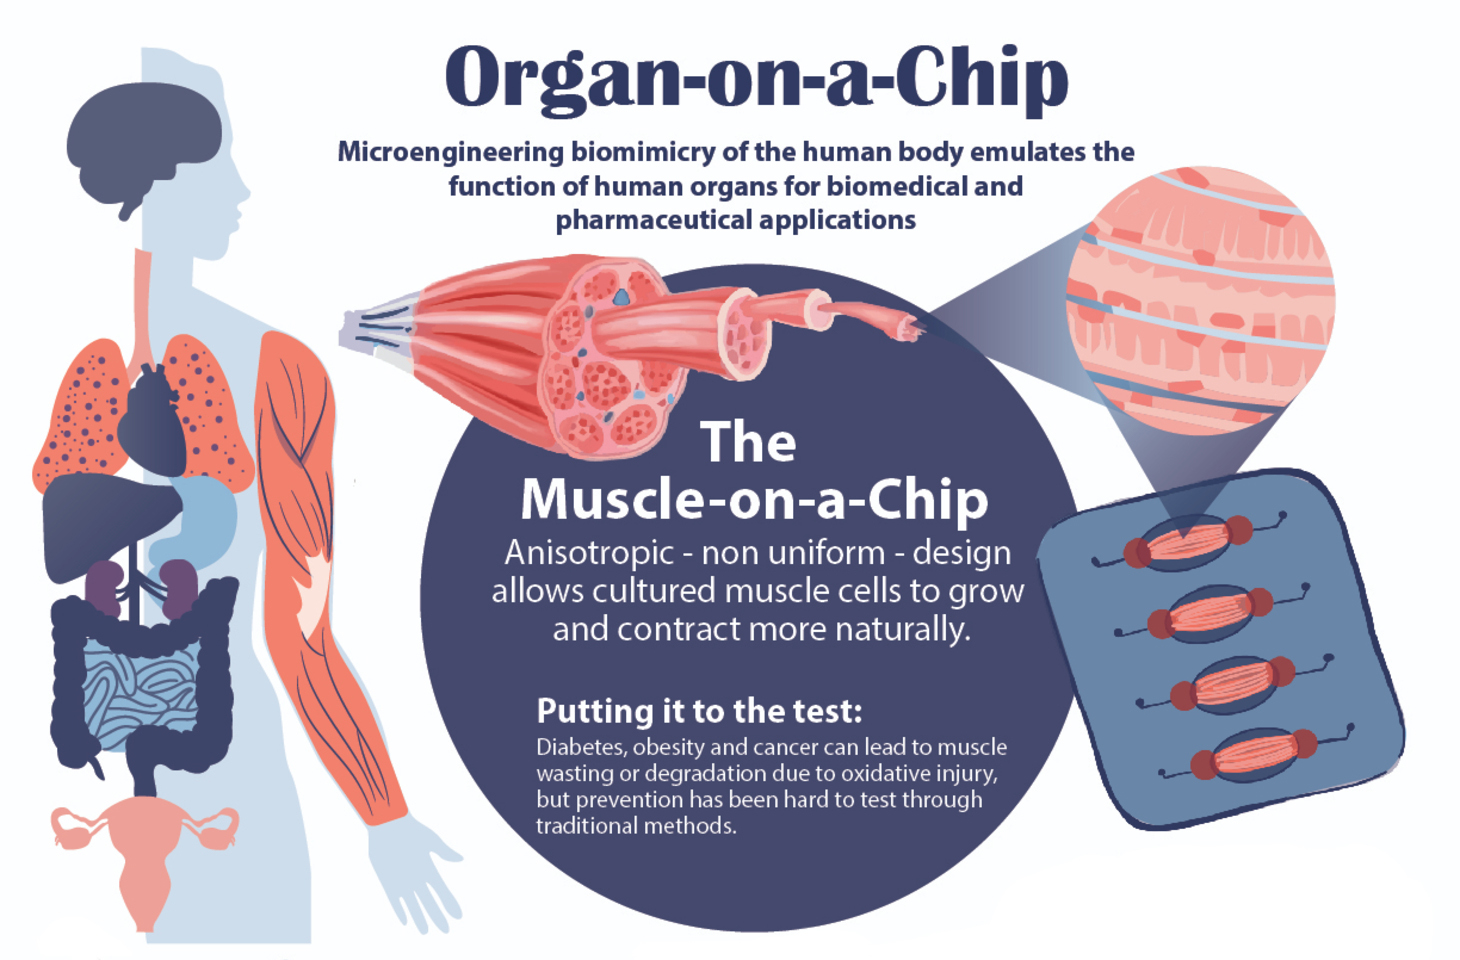 Illustration of human body and organ on a chip technology highlighted.